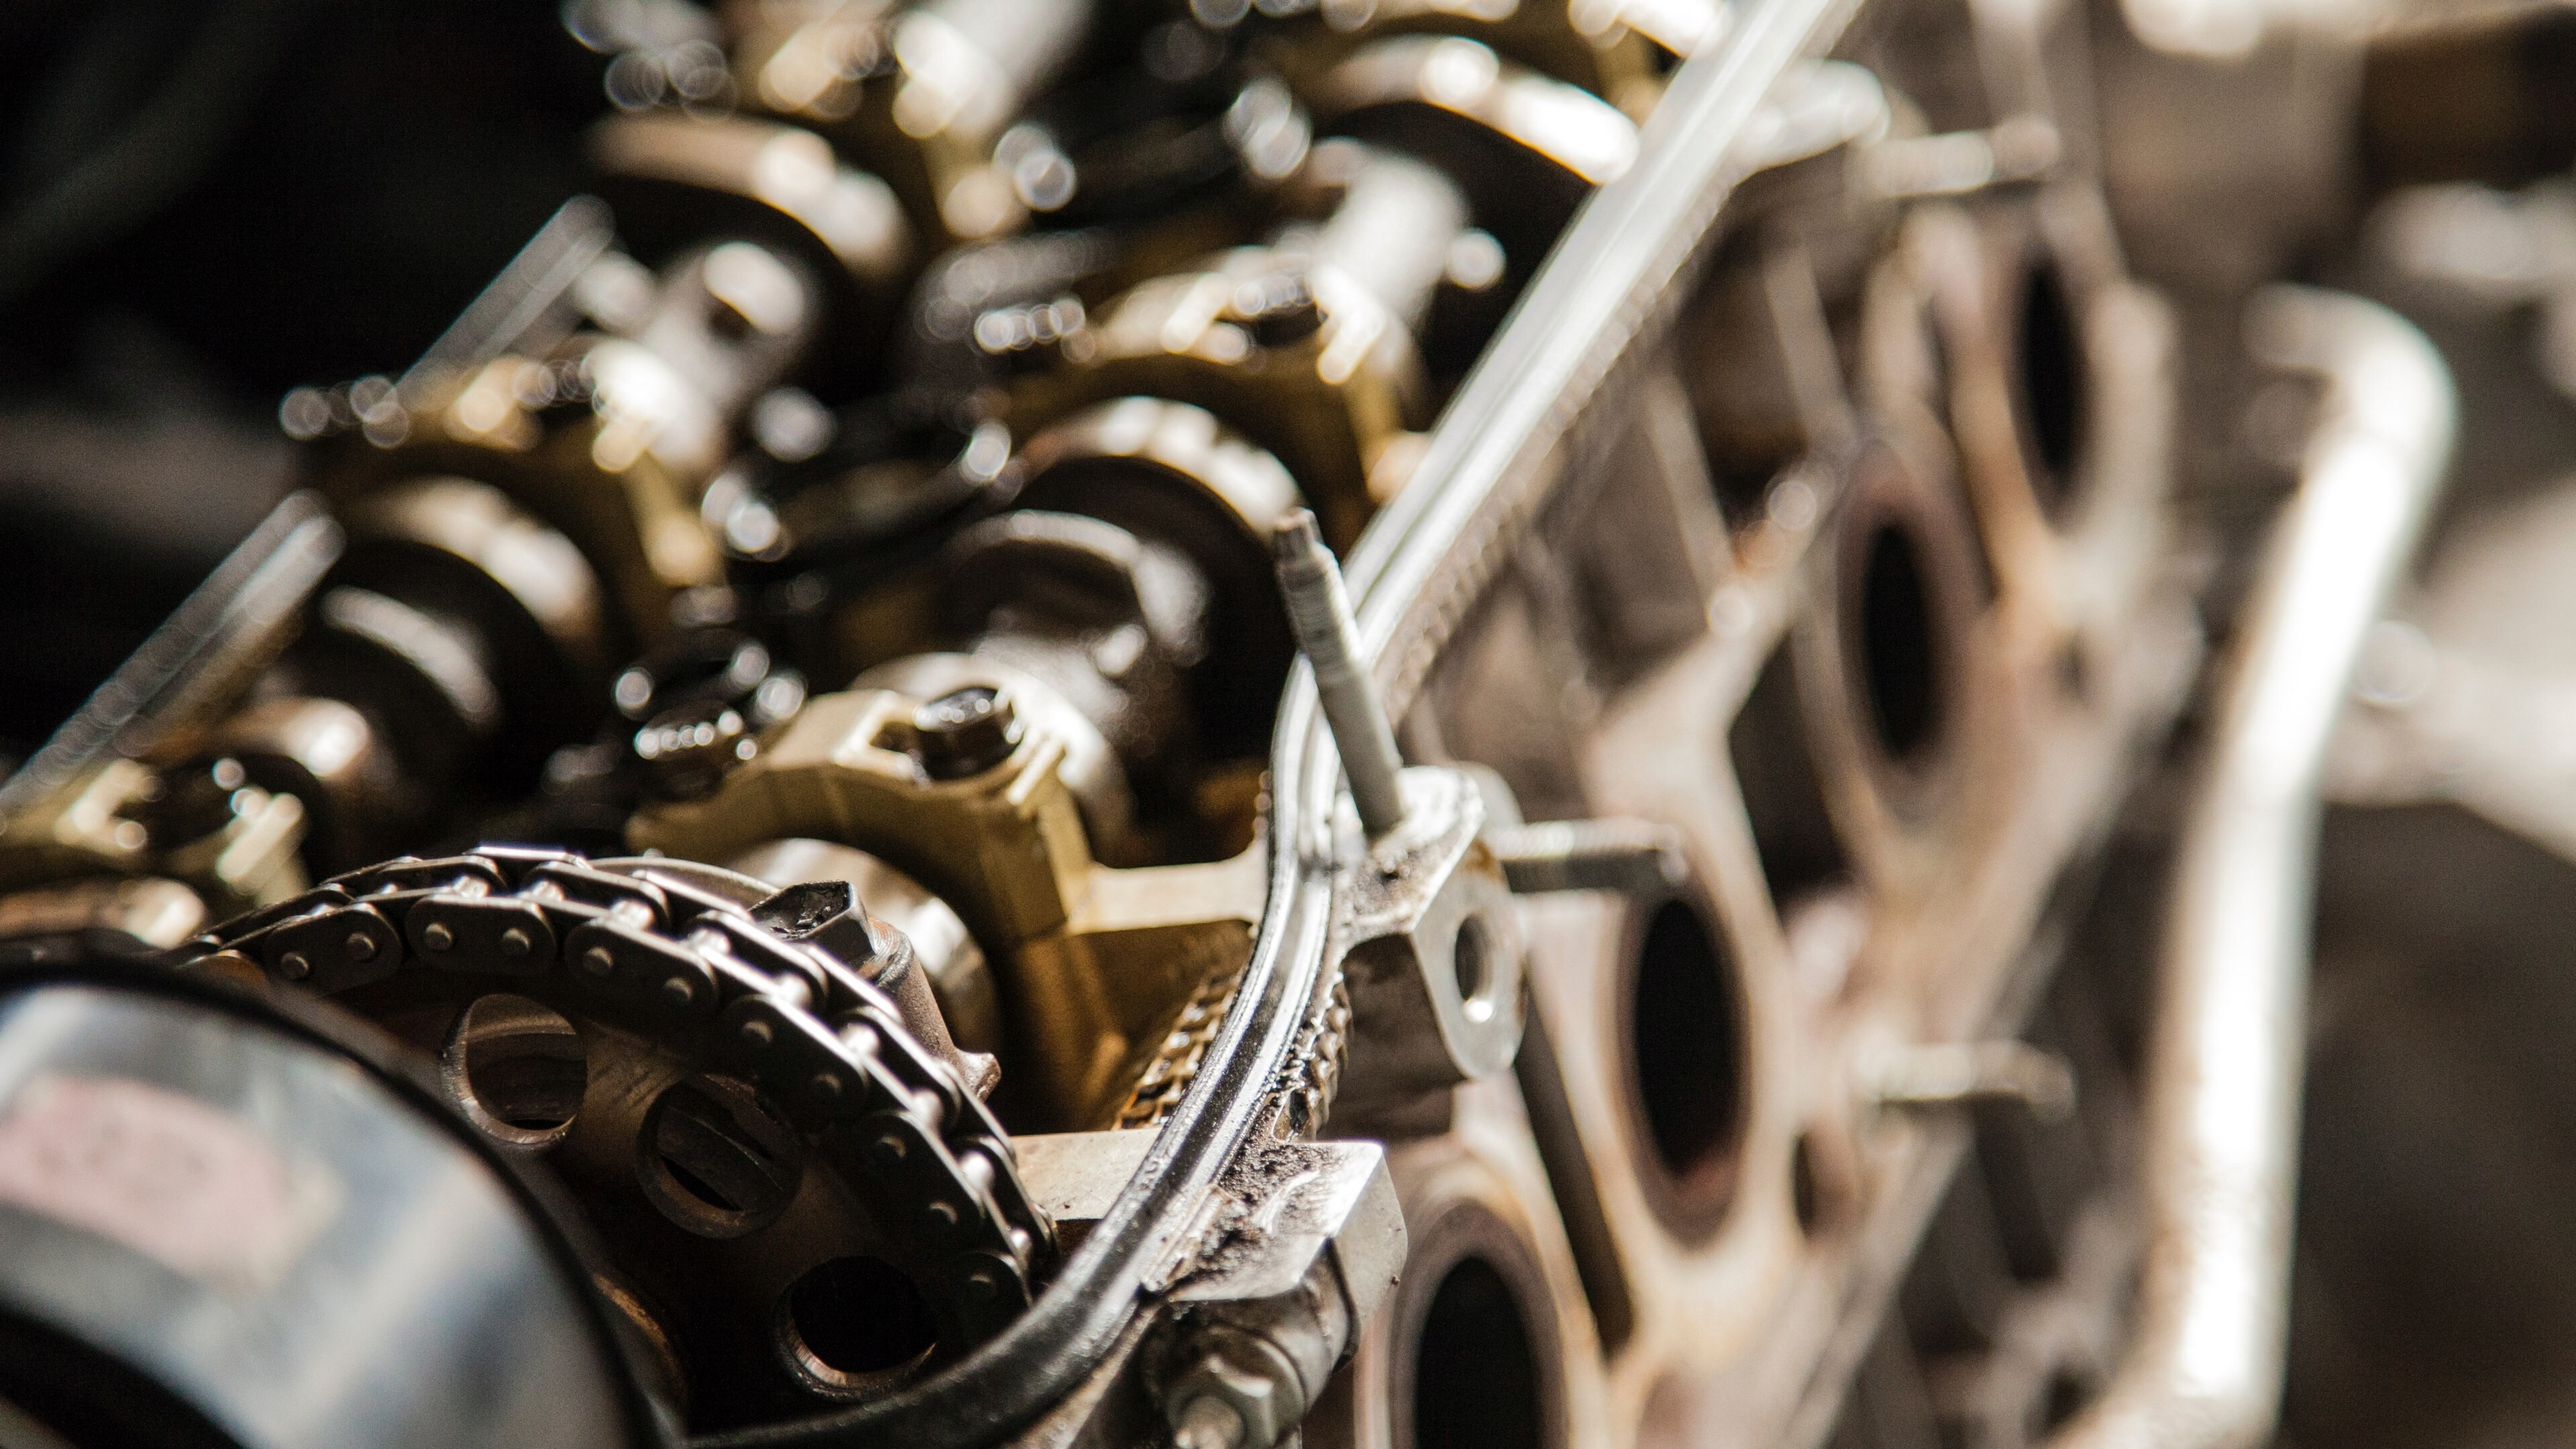 Gear: A vintage looking metal machine engine block with cogs, A transmission. 3840x2160 4K Background.